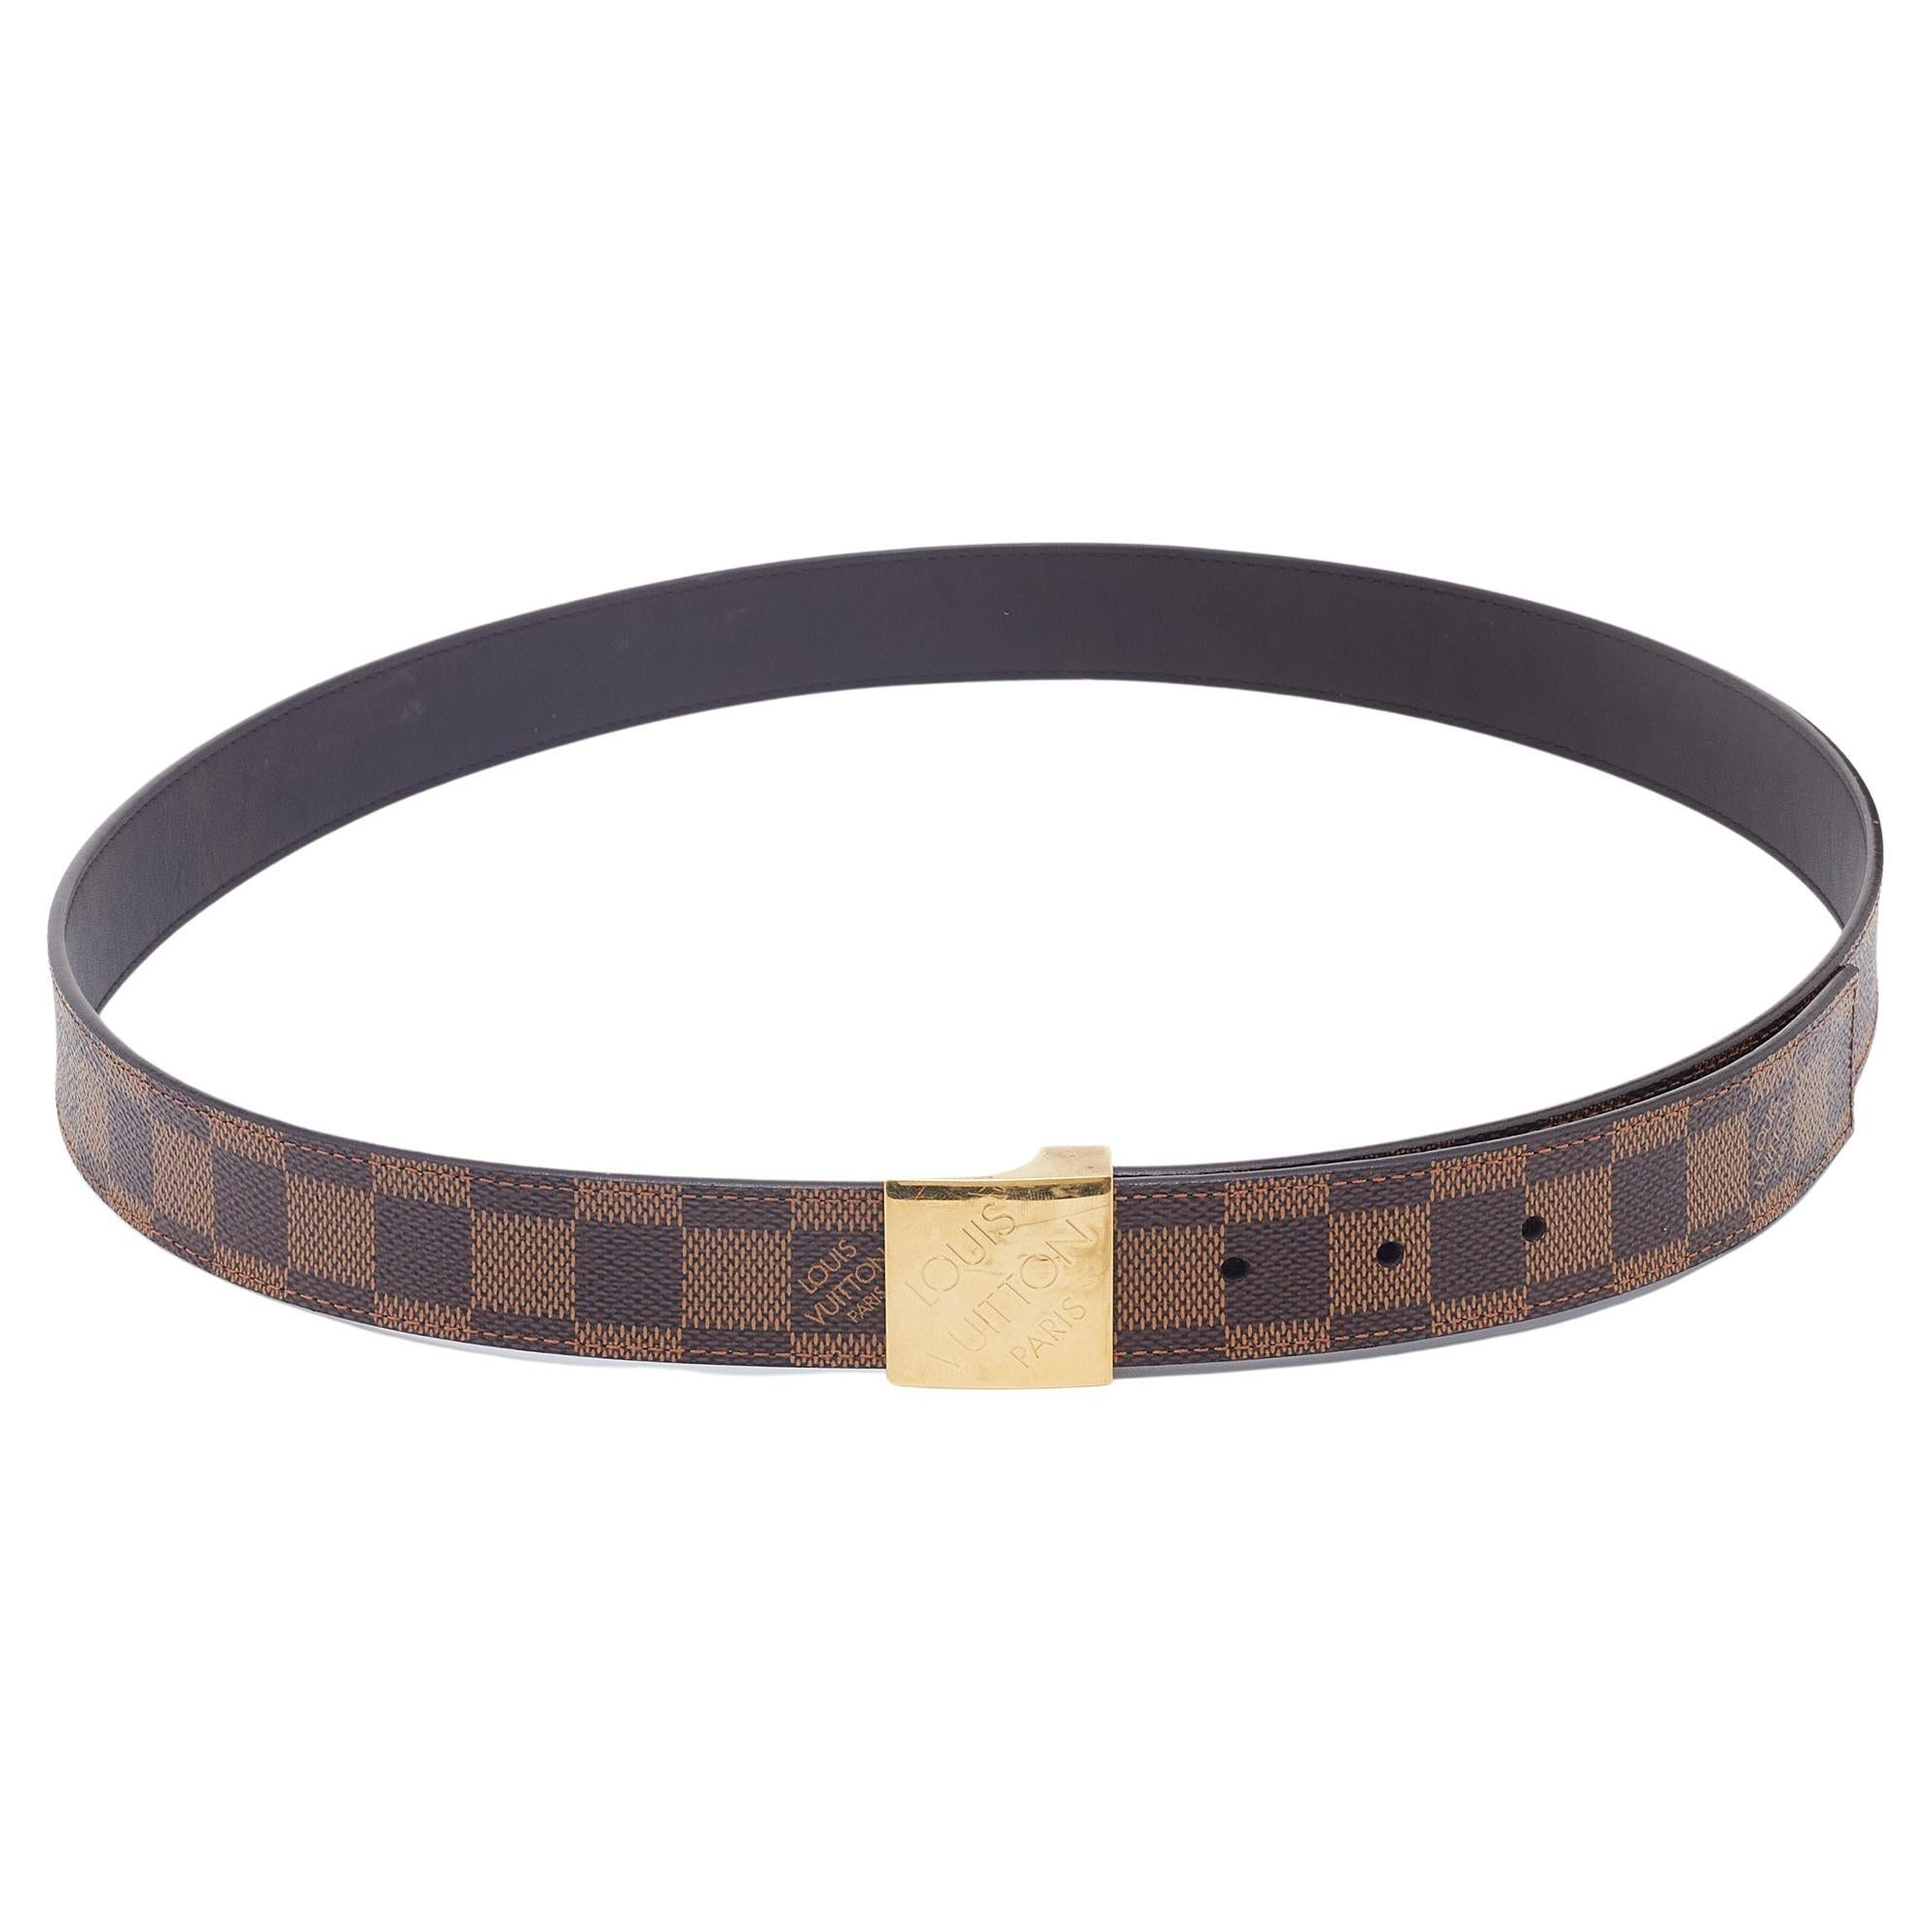 This belt from the House of Louis Vuitton will definitely elevate the look of your attire. It is created using brown coated canvas, with an engraved buckle perched on the front. Elevated with gold-tone hardware, this belt is super sturdy and flaunts